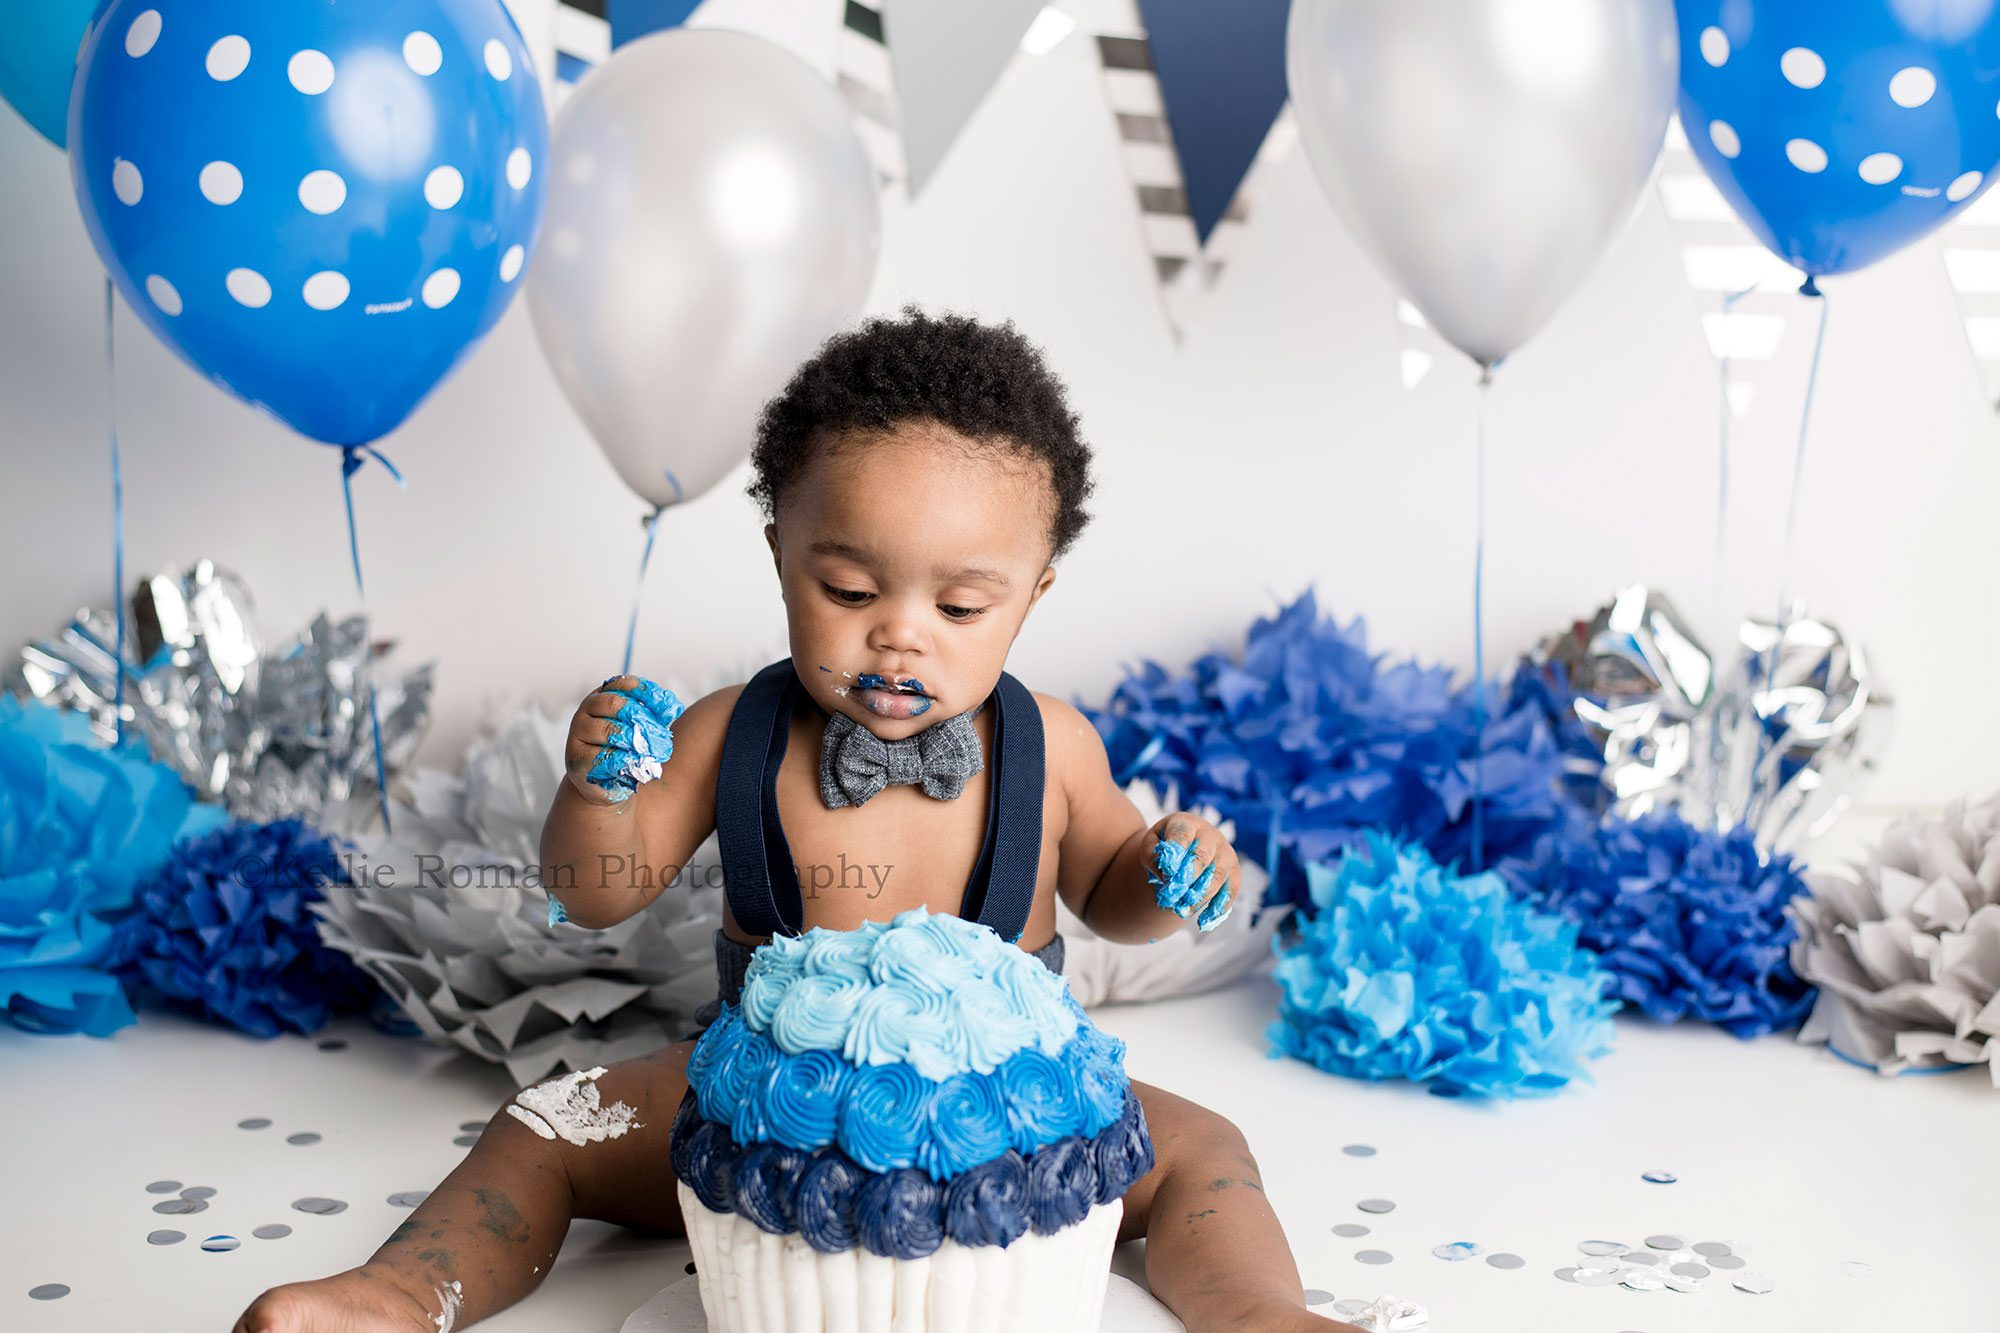 shades of blue cake smash one year old boy in a Milwaukee photography studio with a white and blue cake in front of him he's looking down with blue frosting on his legs and hands and has a white backdrop with blue balloons he's wearing a bow tie and suspenders